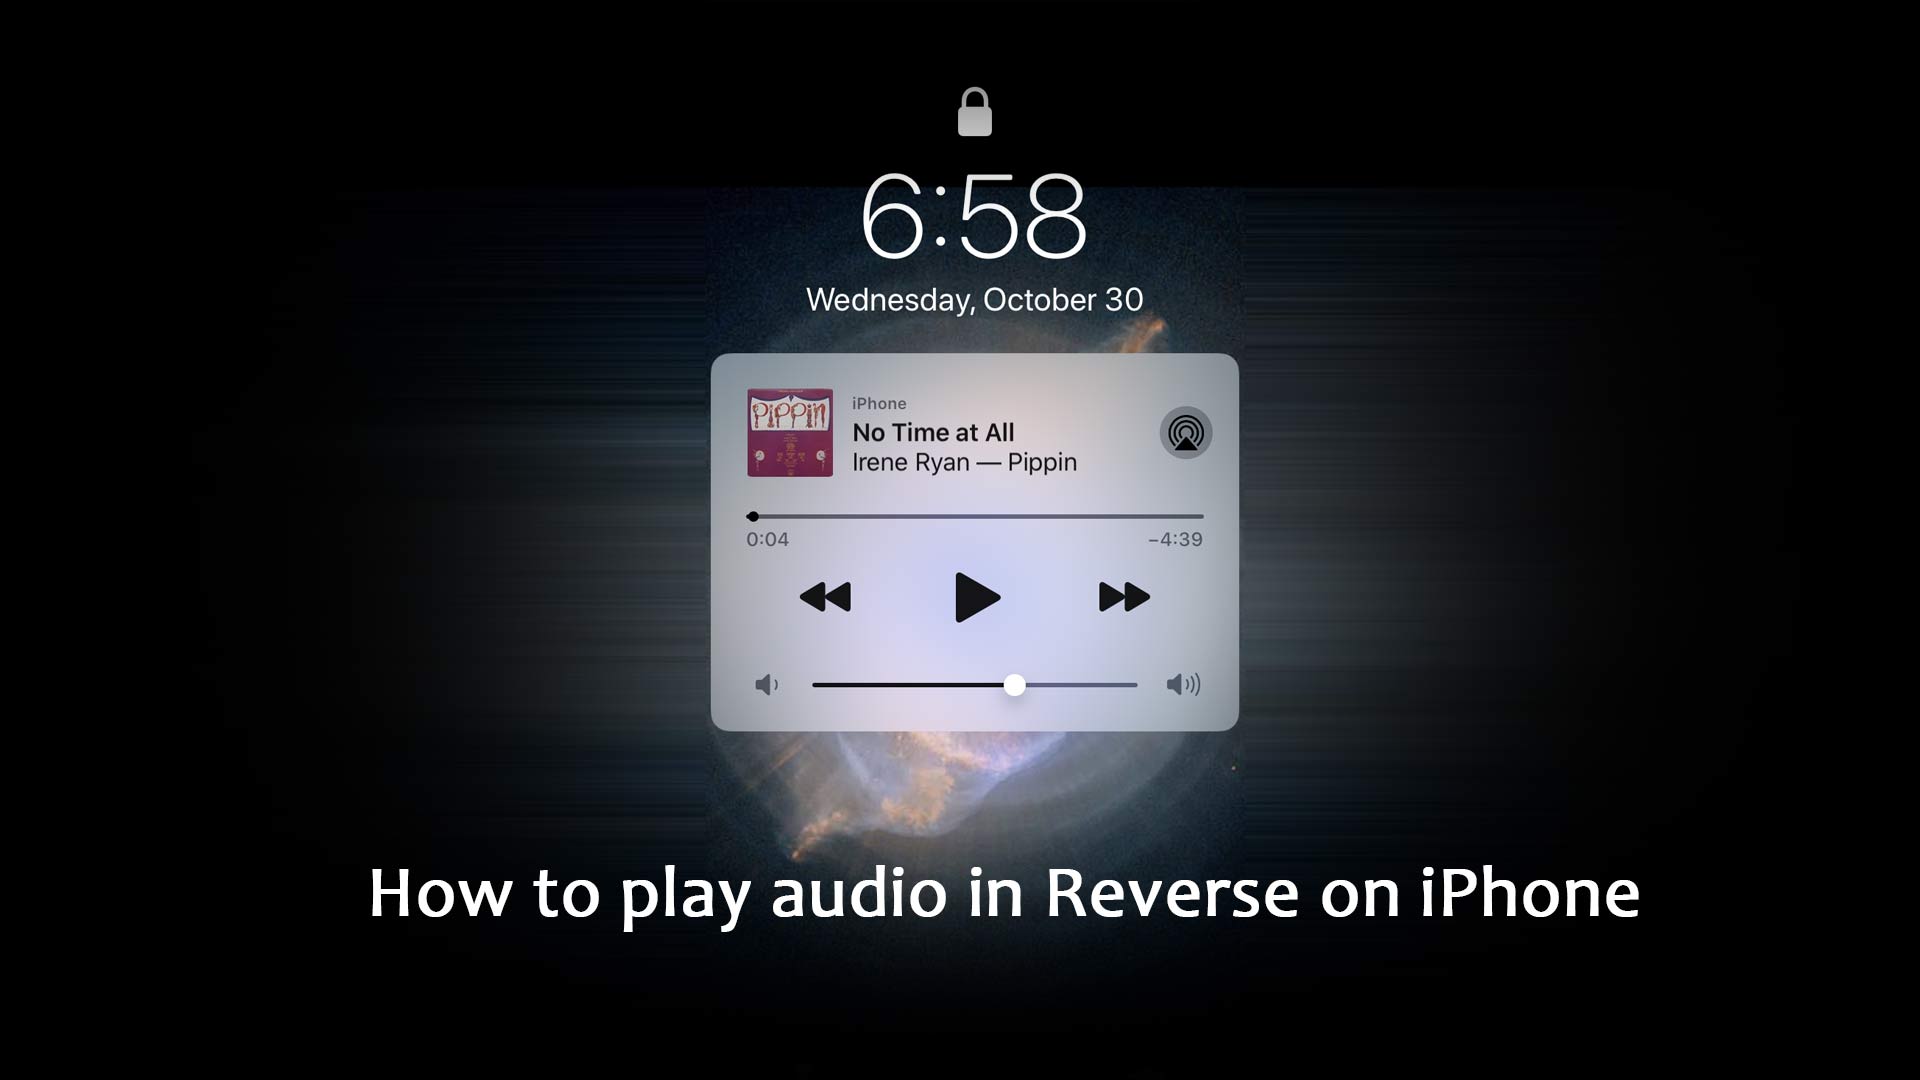 How to play audio in Reverse on iPhone